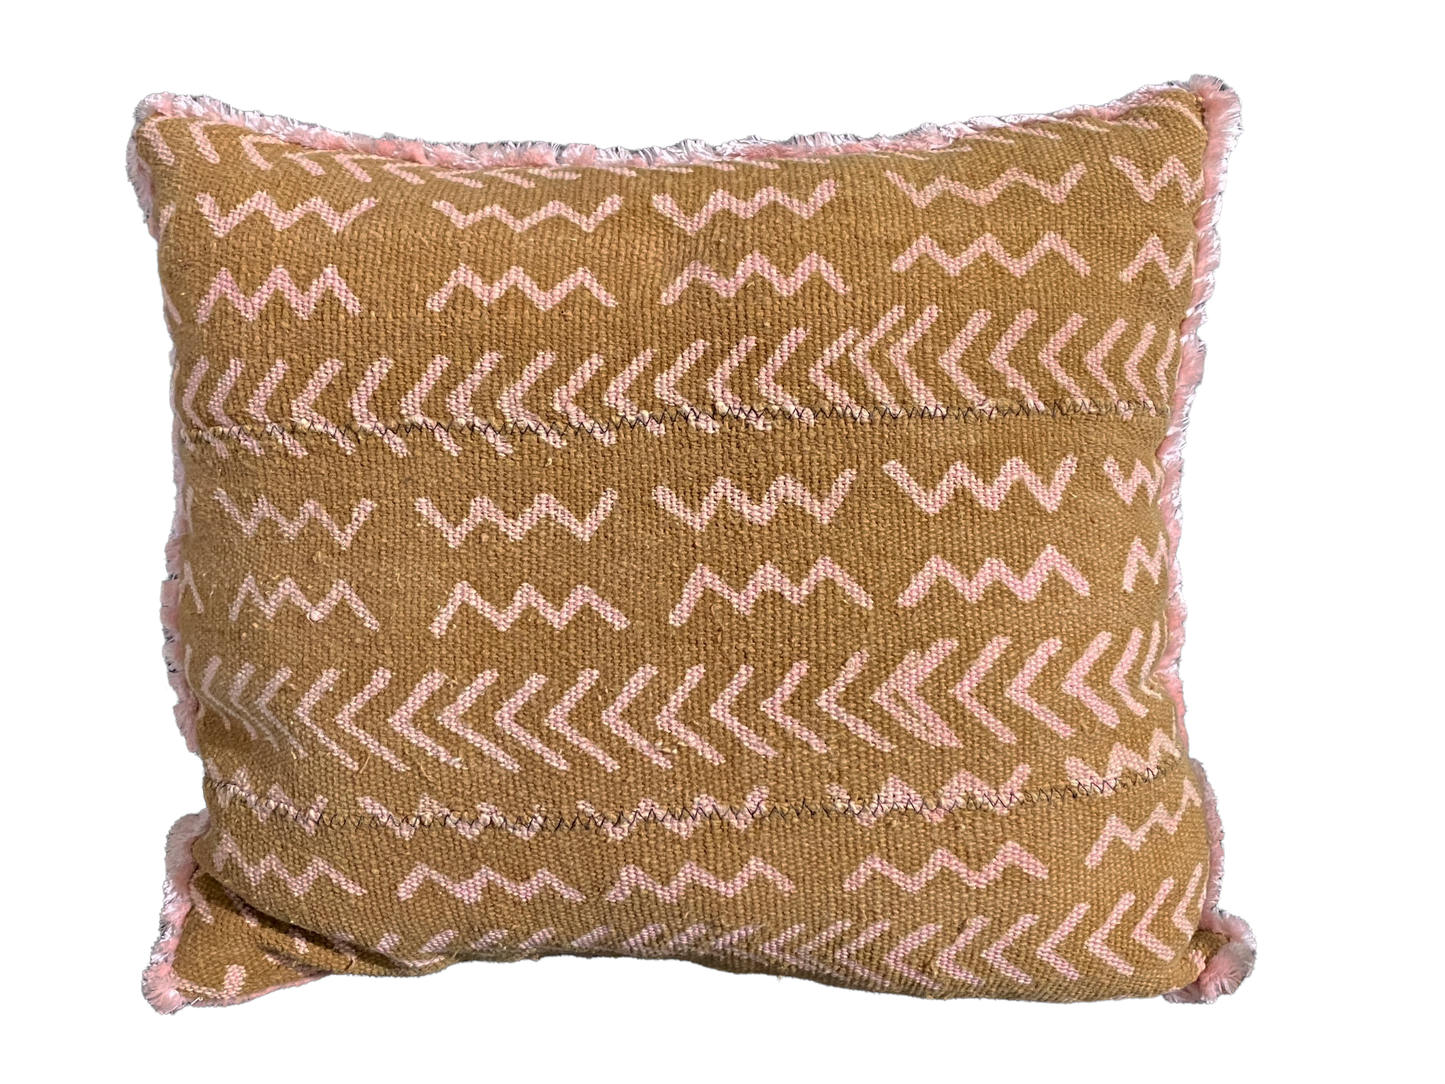 #4806 Contemporary Brown & Pink Pillow Made from Vintage Bogolan African Mali Mud Cloth